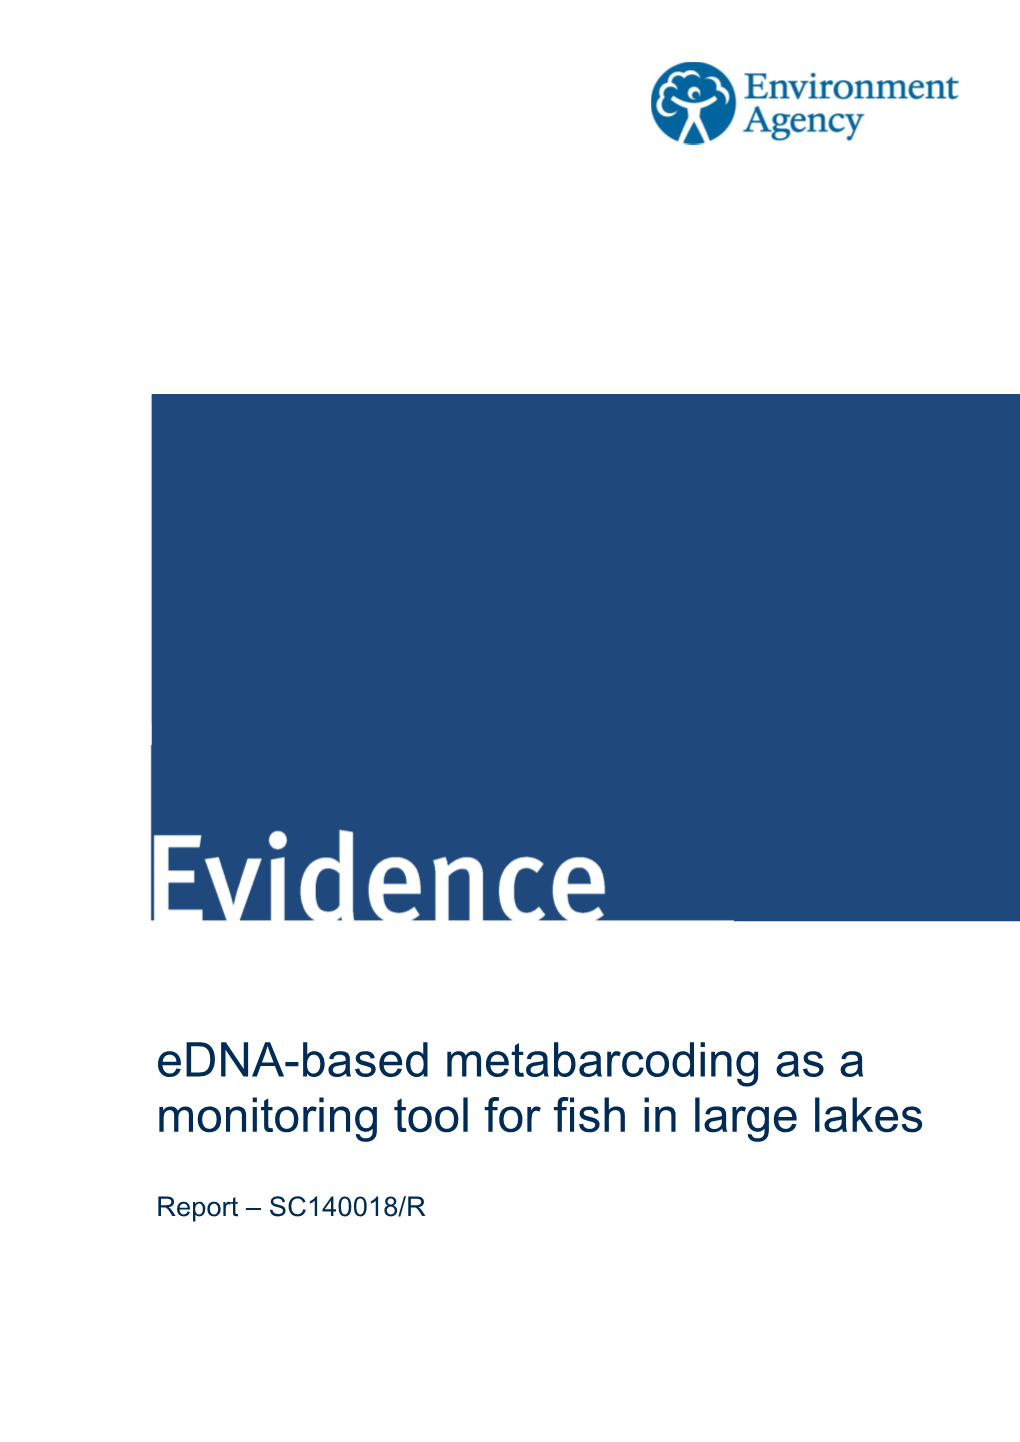 Edna-Based Metabarcoding As a Monitoring Tool for Fish in Large Lakes